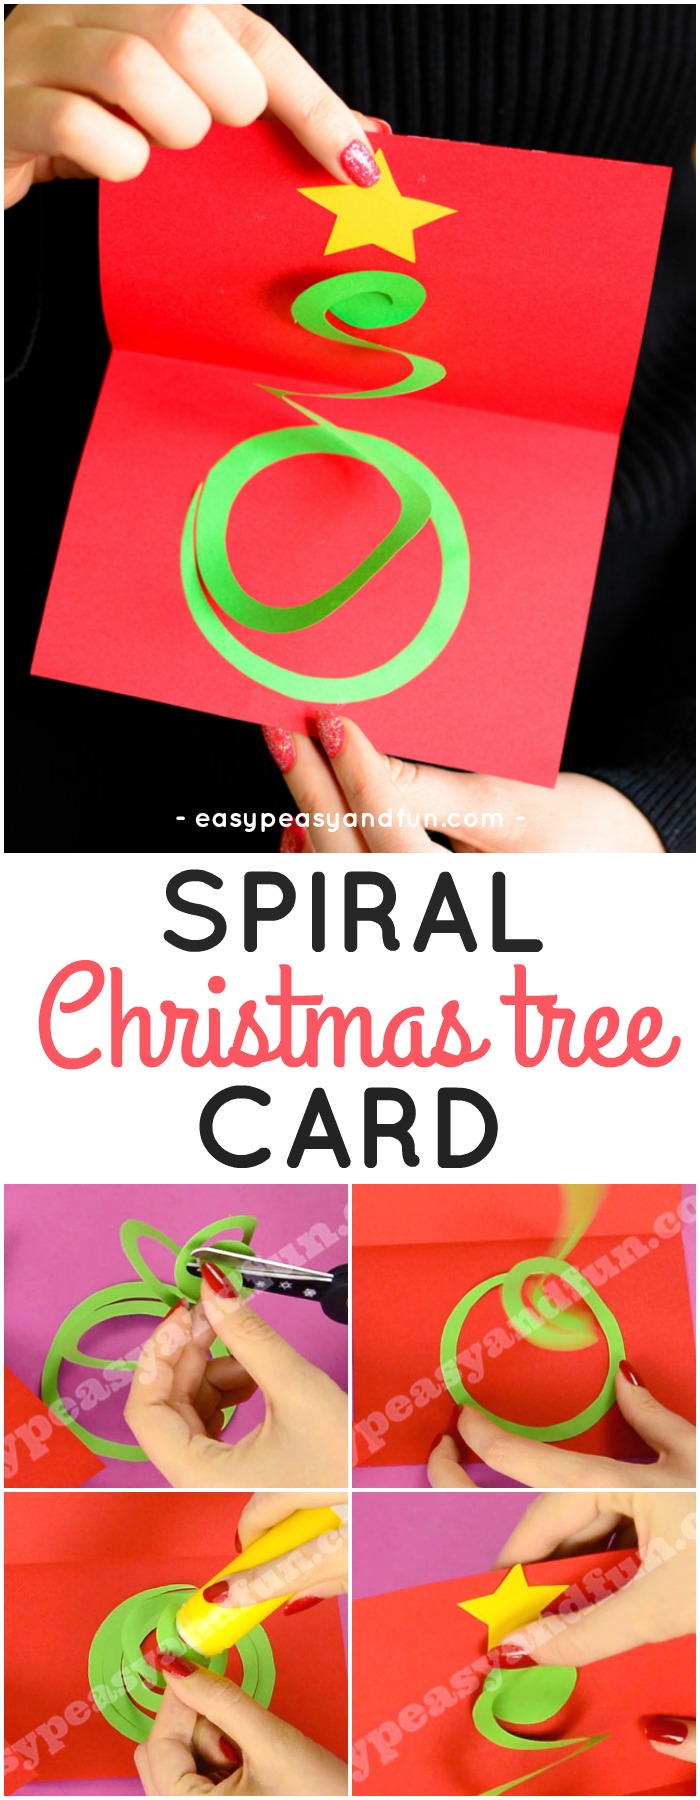 Spiral Christmas tree card idea.  Fun Christmas paper crafts for kids.  #Christmascraftsforkids #papercraftsforkids #DIYChristmascard